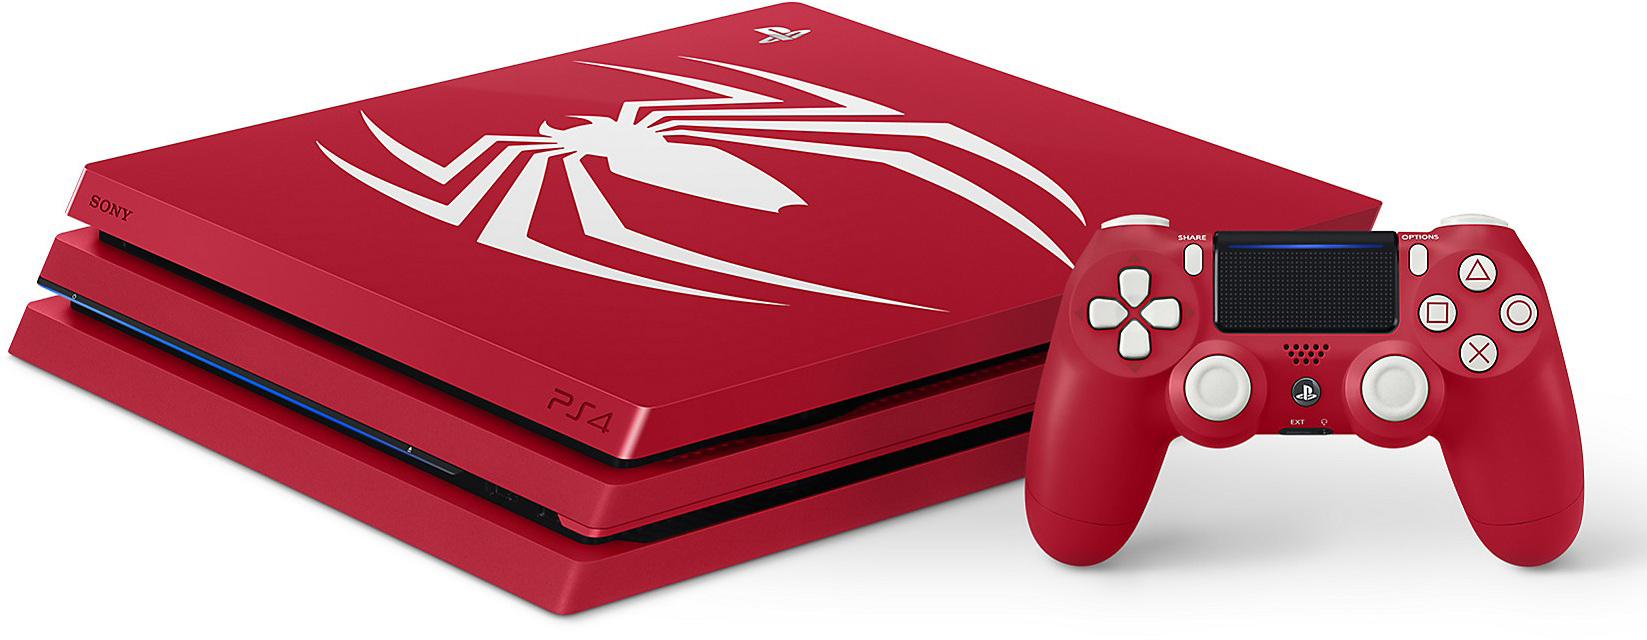 ps4 slim spiderman limited edition